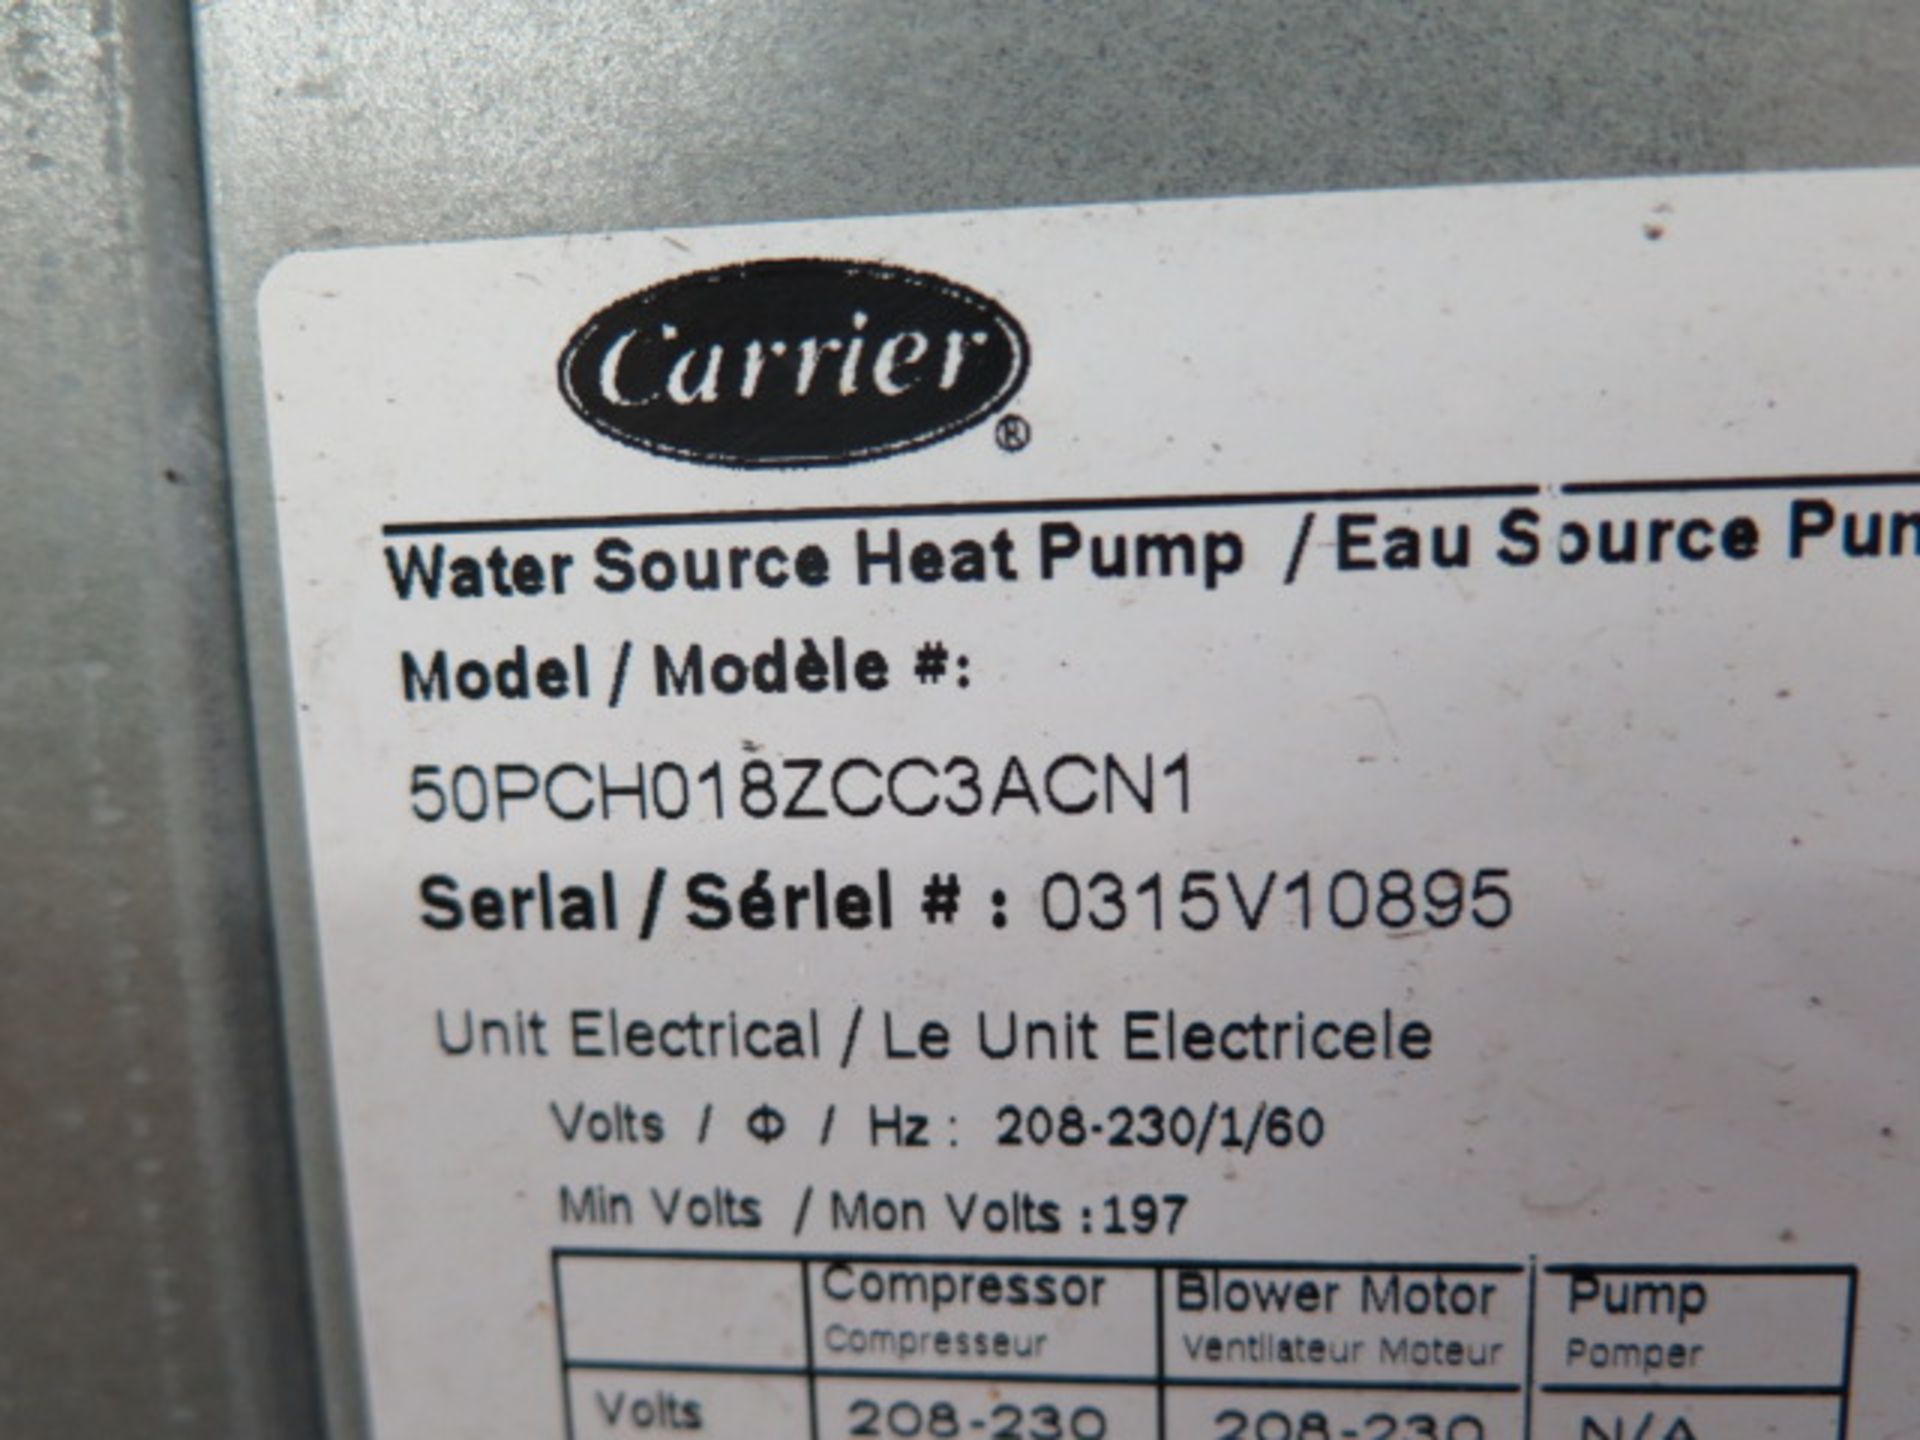 Carrier mdl. 50PCH018ZCC3ACN1 1.5 Ton Heat Pump 208/230V-1ph - Image 2 of 3